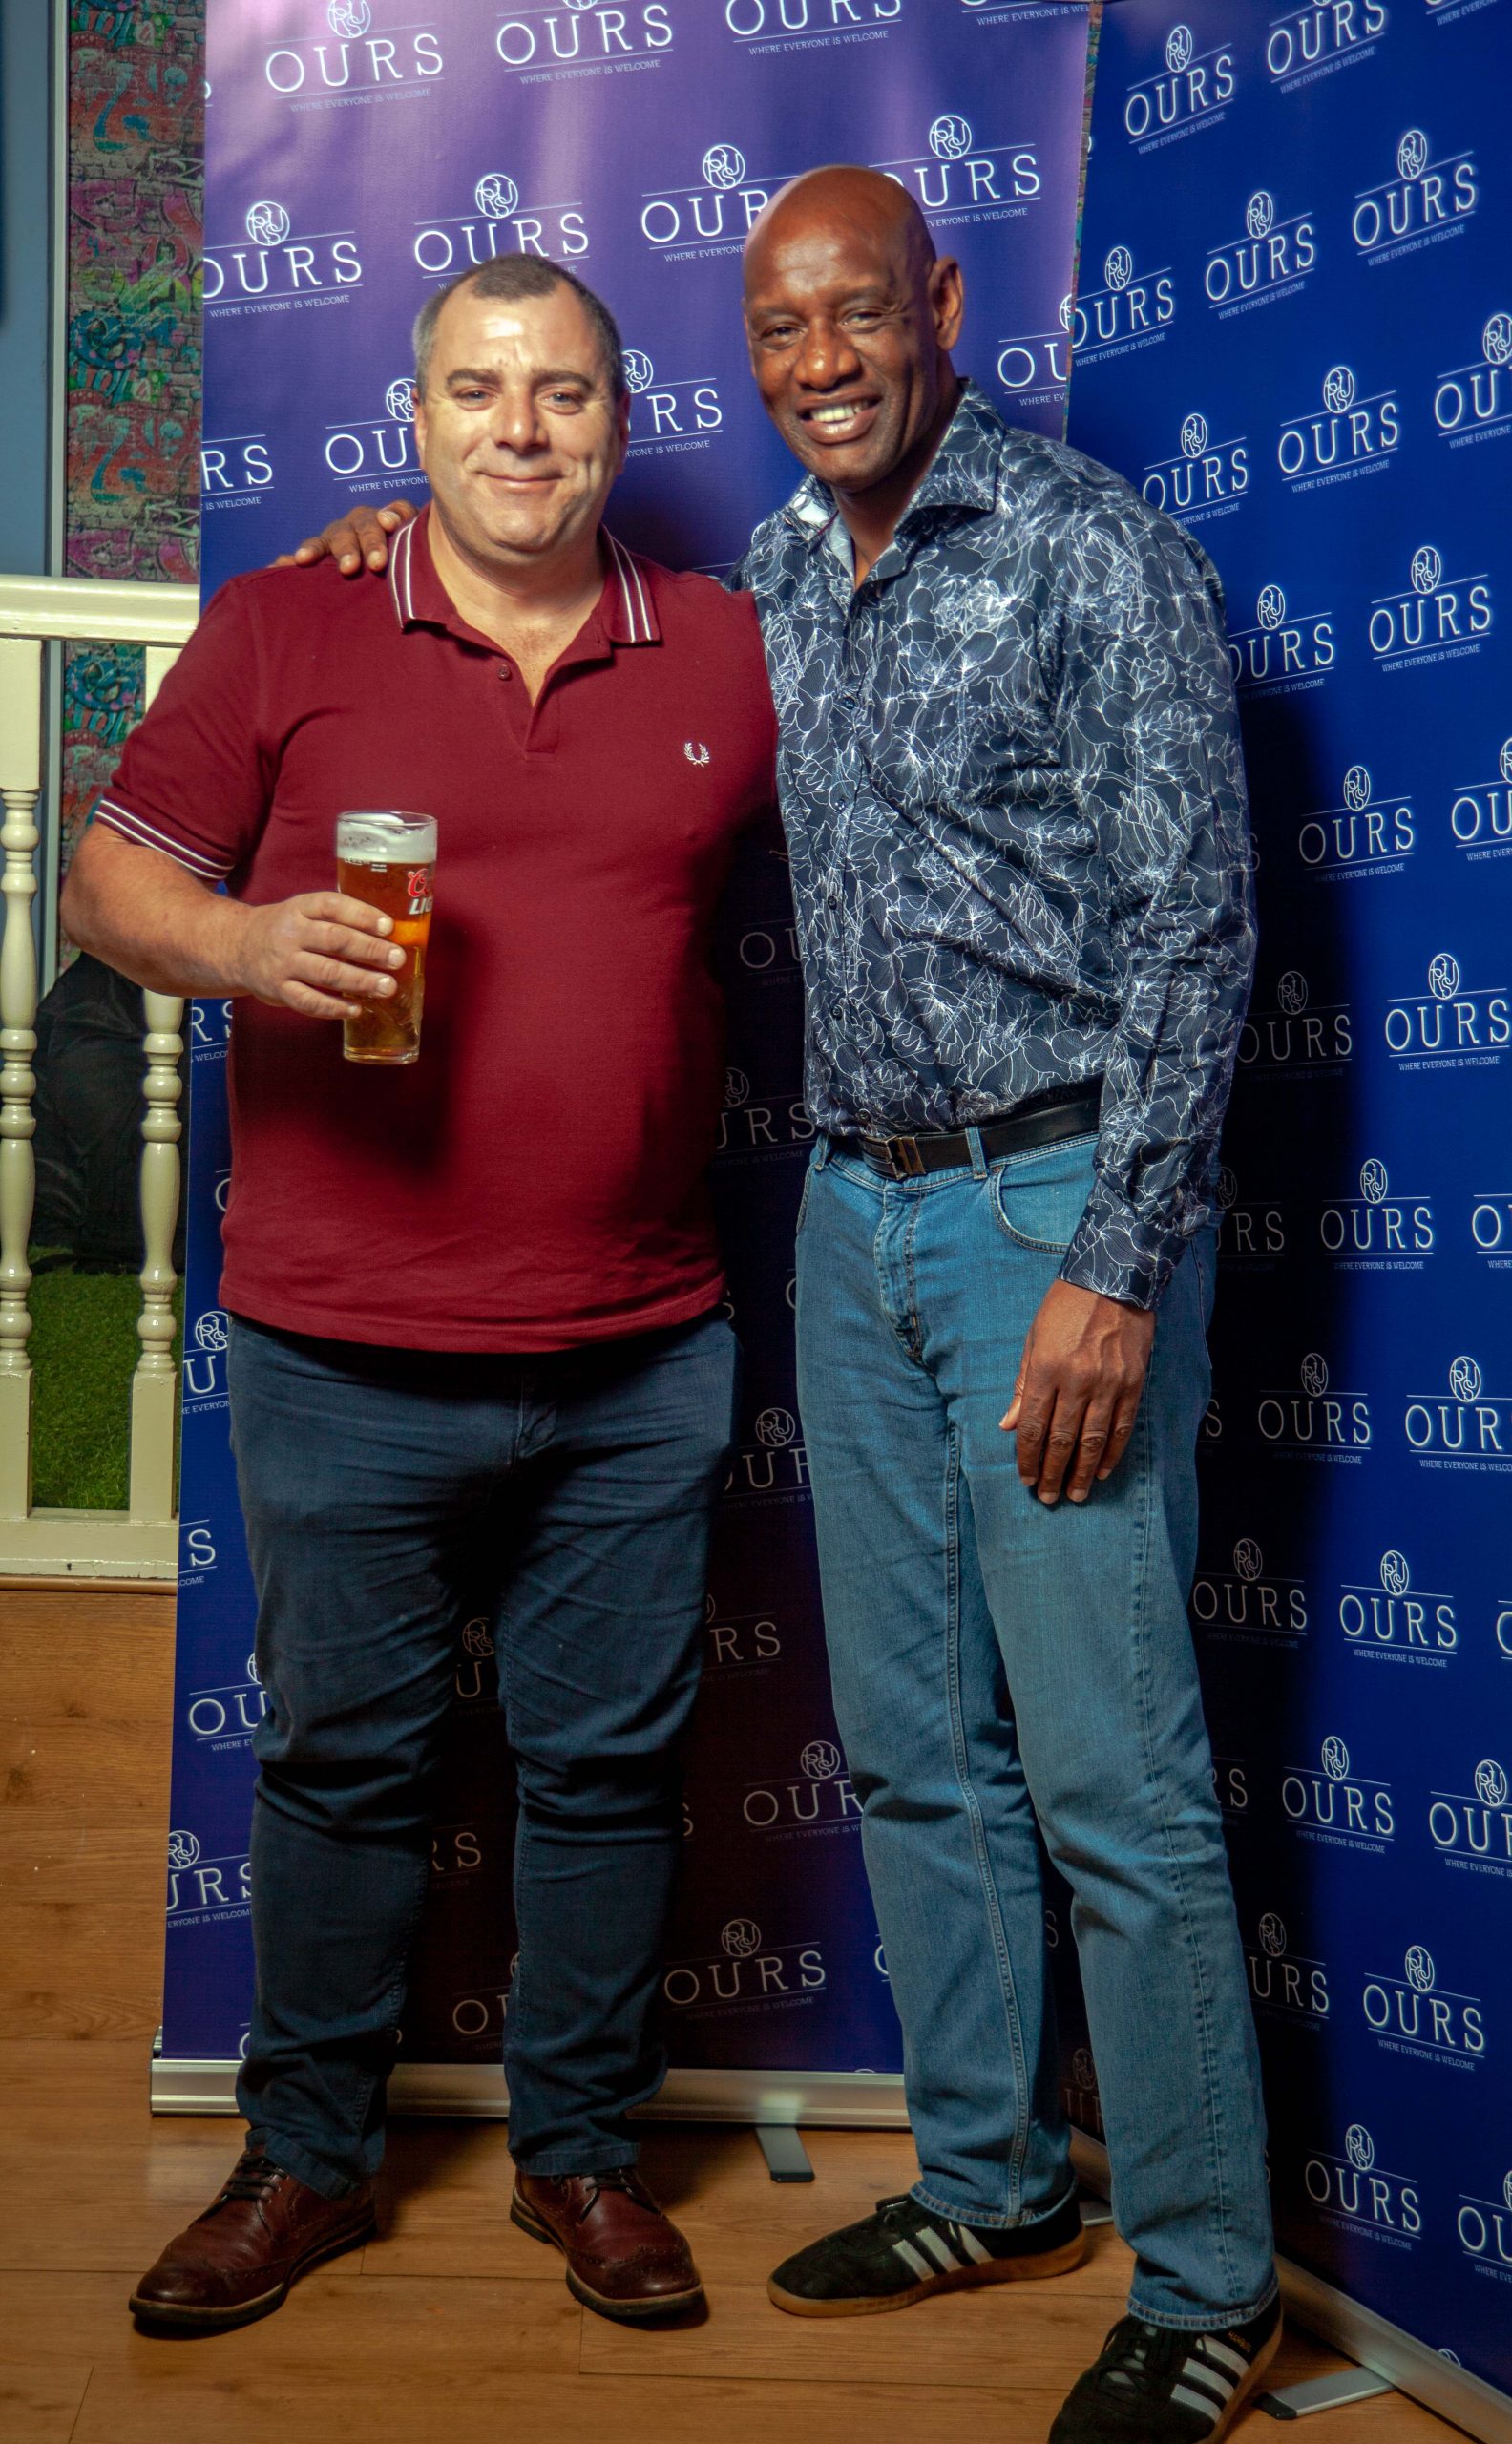 Ours, quiz night with Shaun Wallace-10